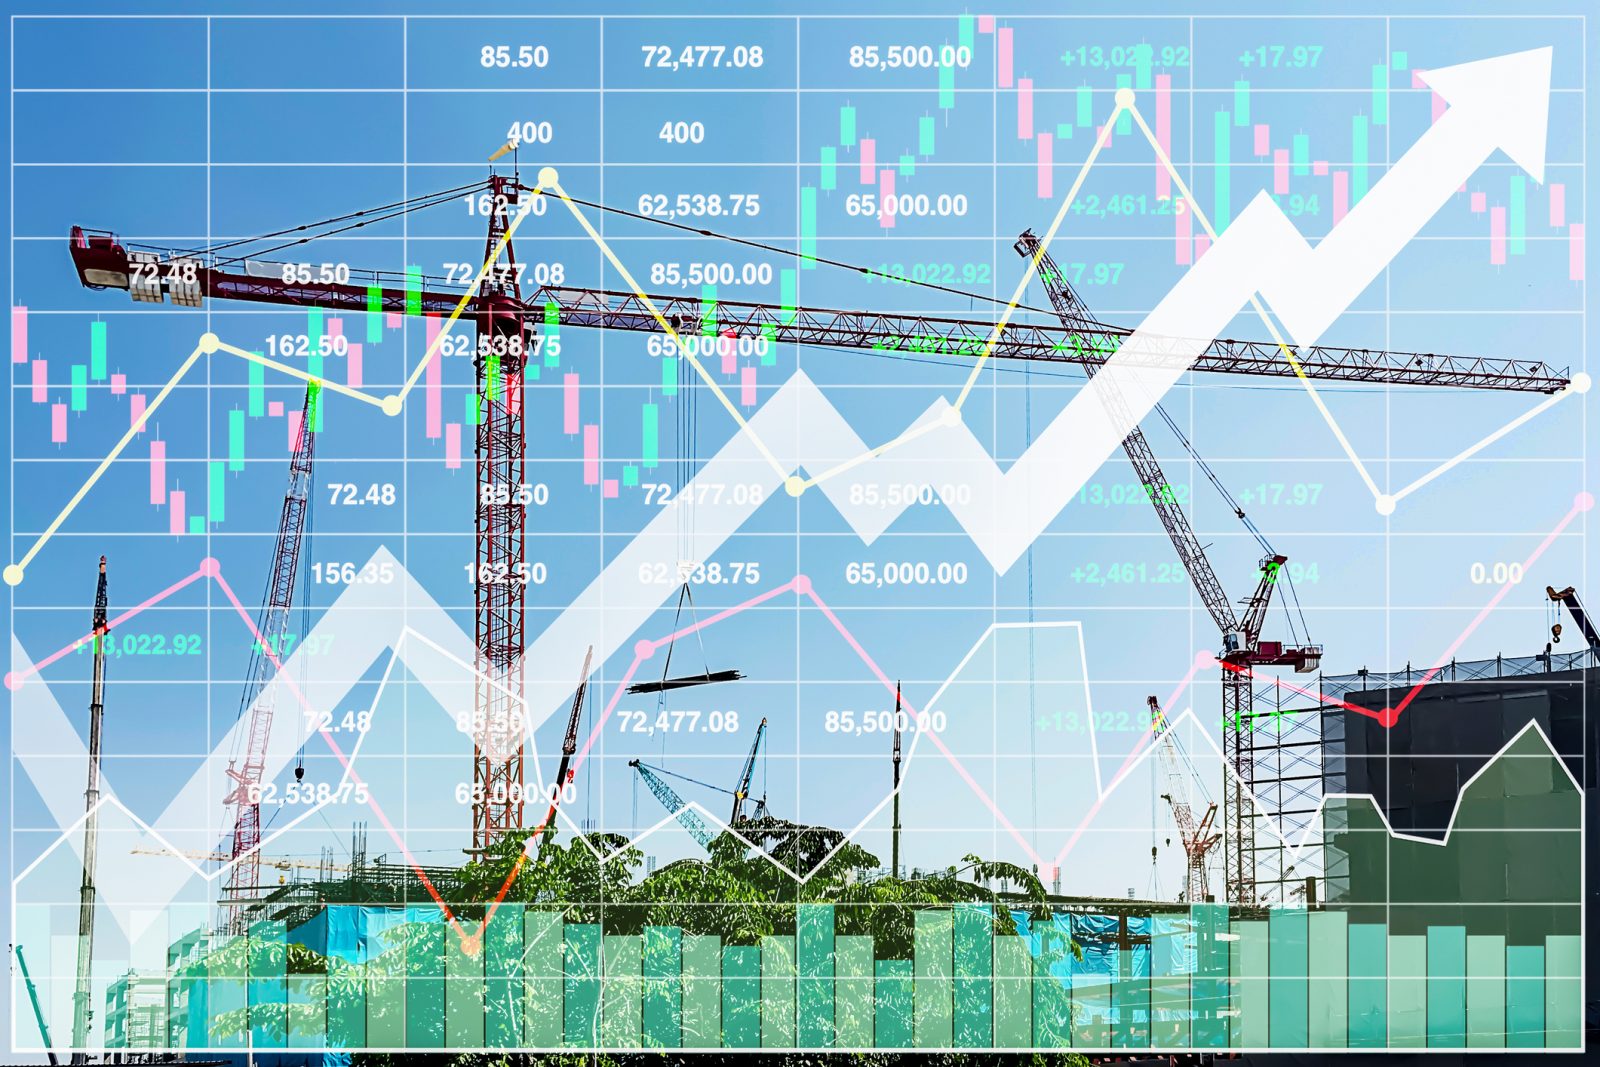 Managing credit risk in the construction sector